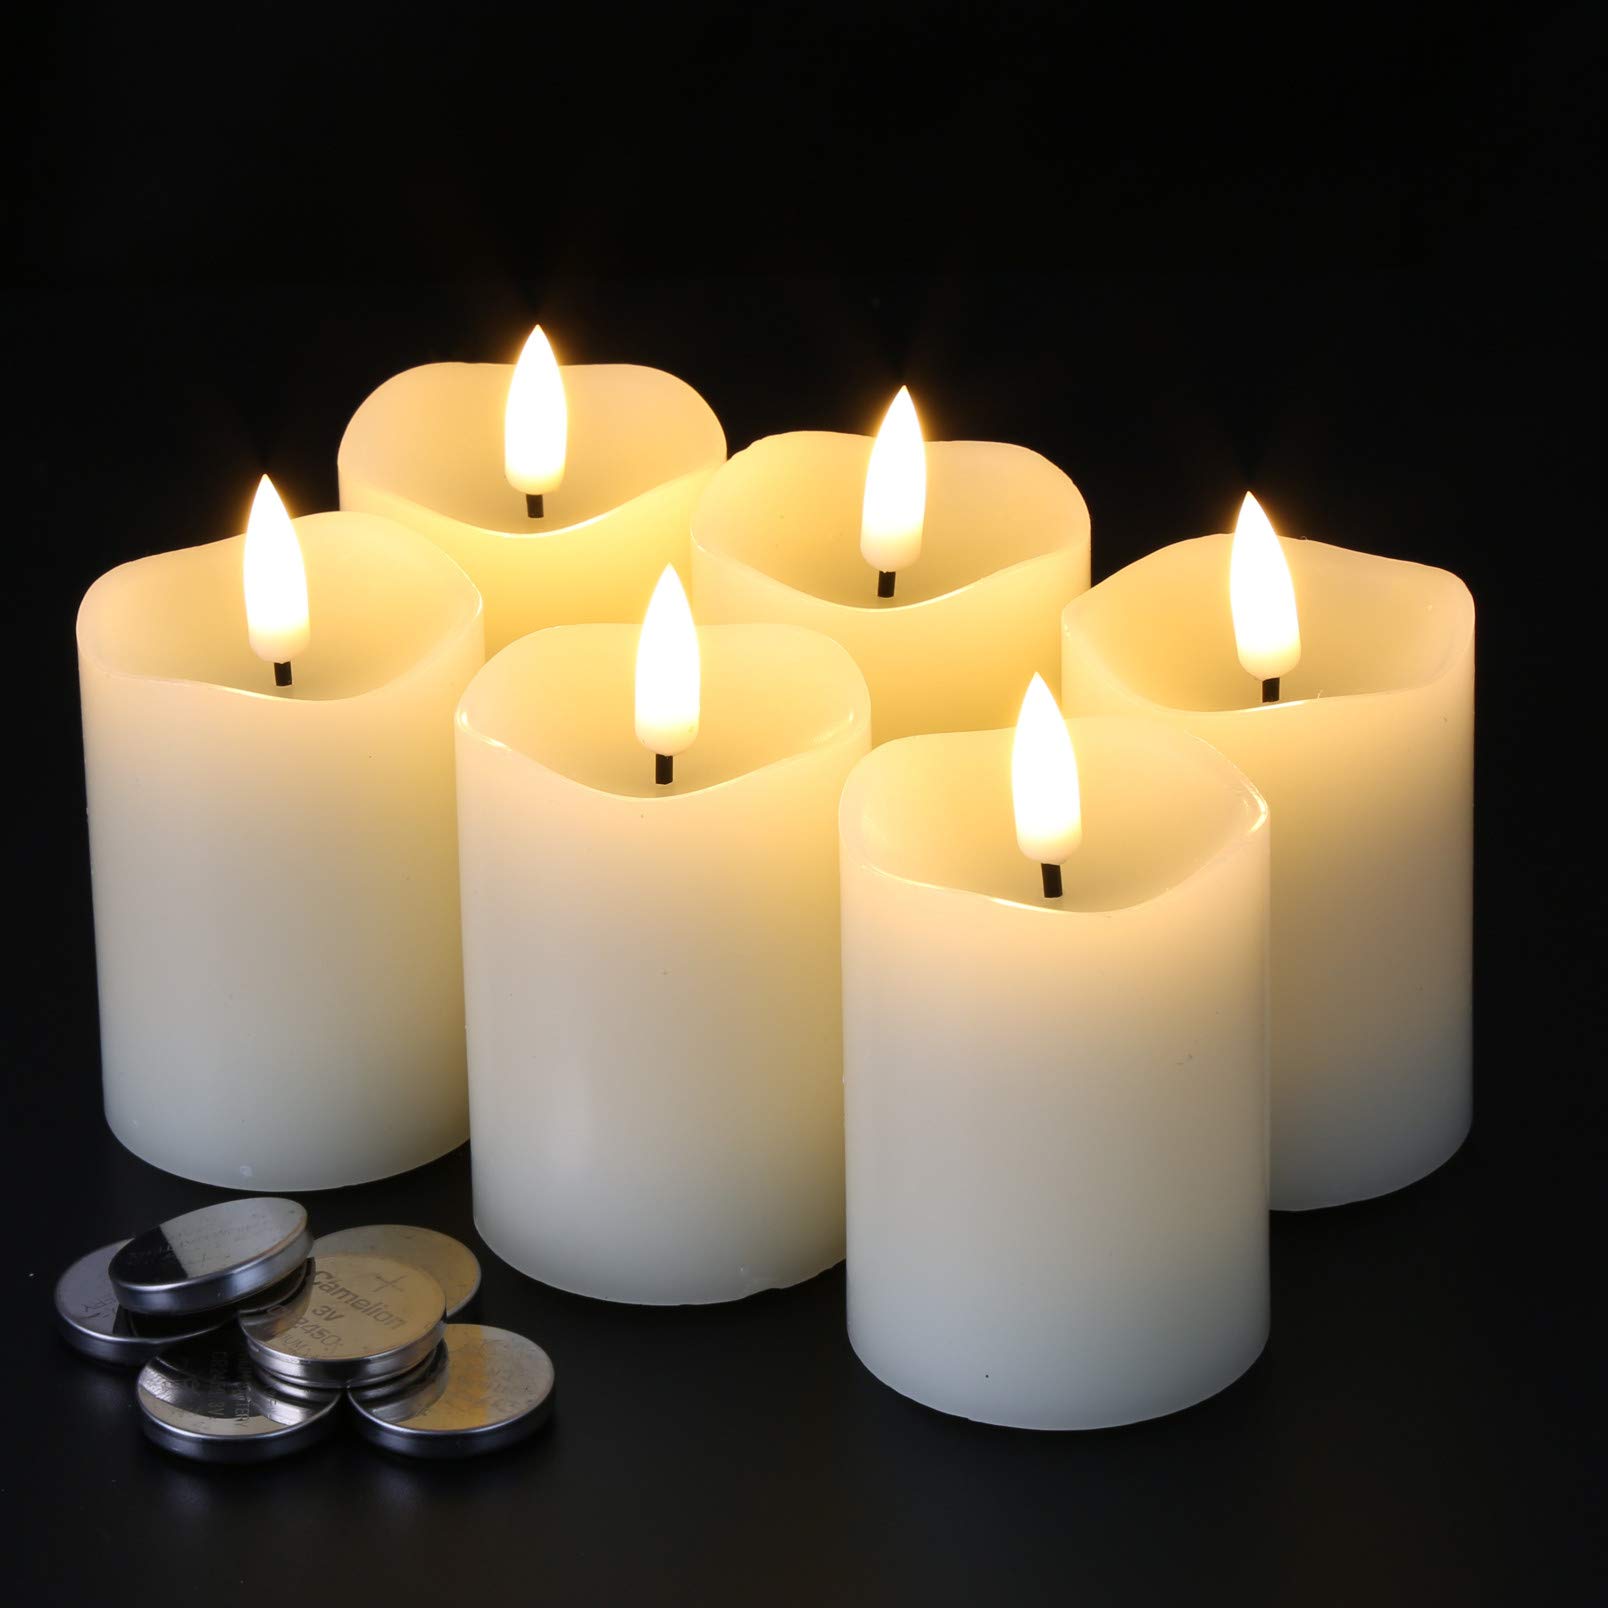 Eywamage Timer Flameless Votive Candles 2 inch x 3 inch , Flickering Small LED Pillar Candles Batteries Included, Ivory Christmas Home Decor 6 Pack with 5 hours timer